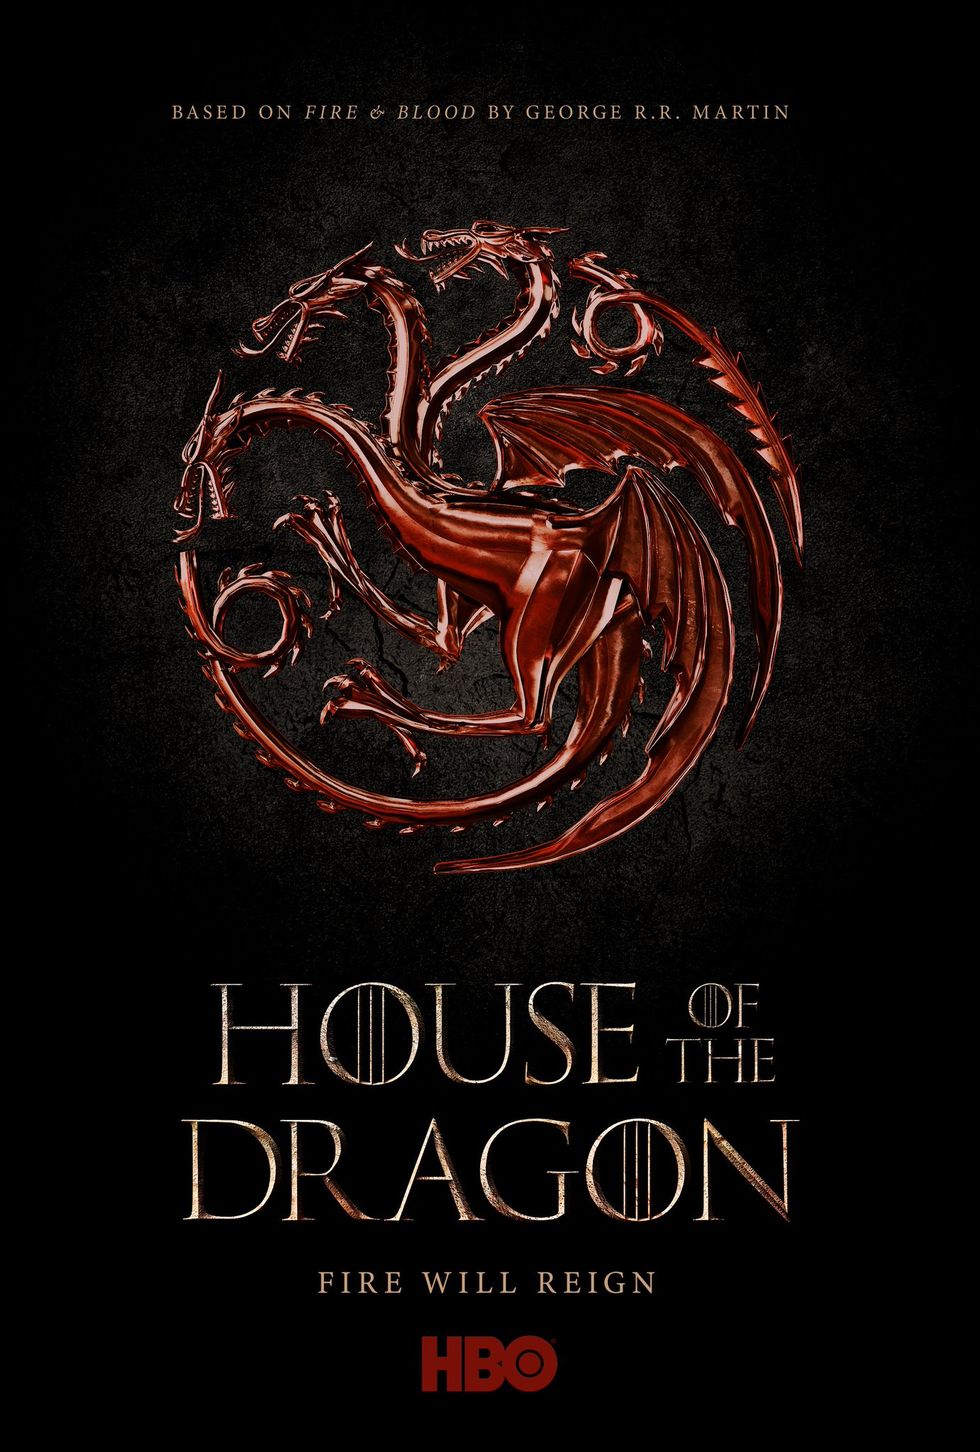 Game of Thrones House of the Dragon poster